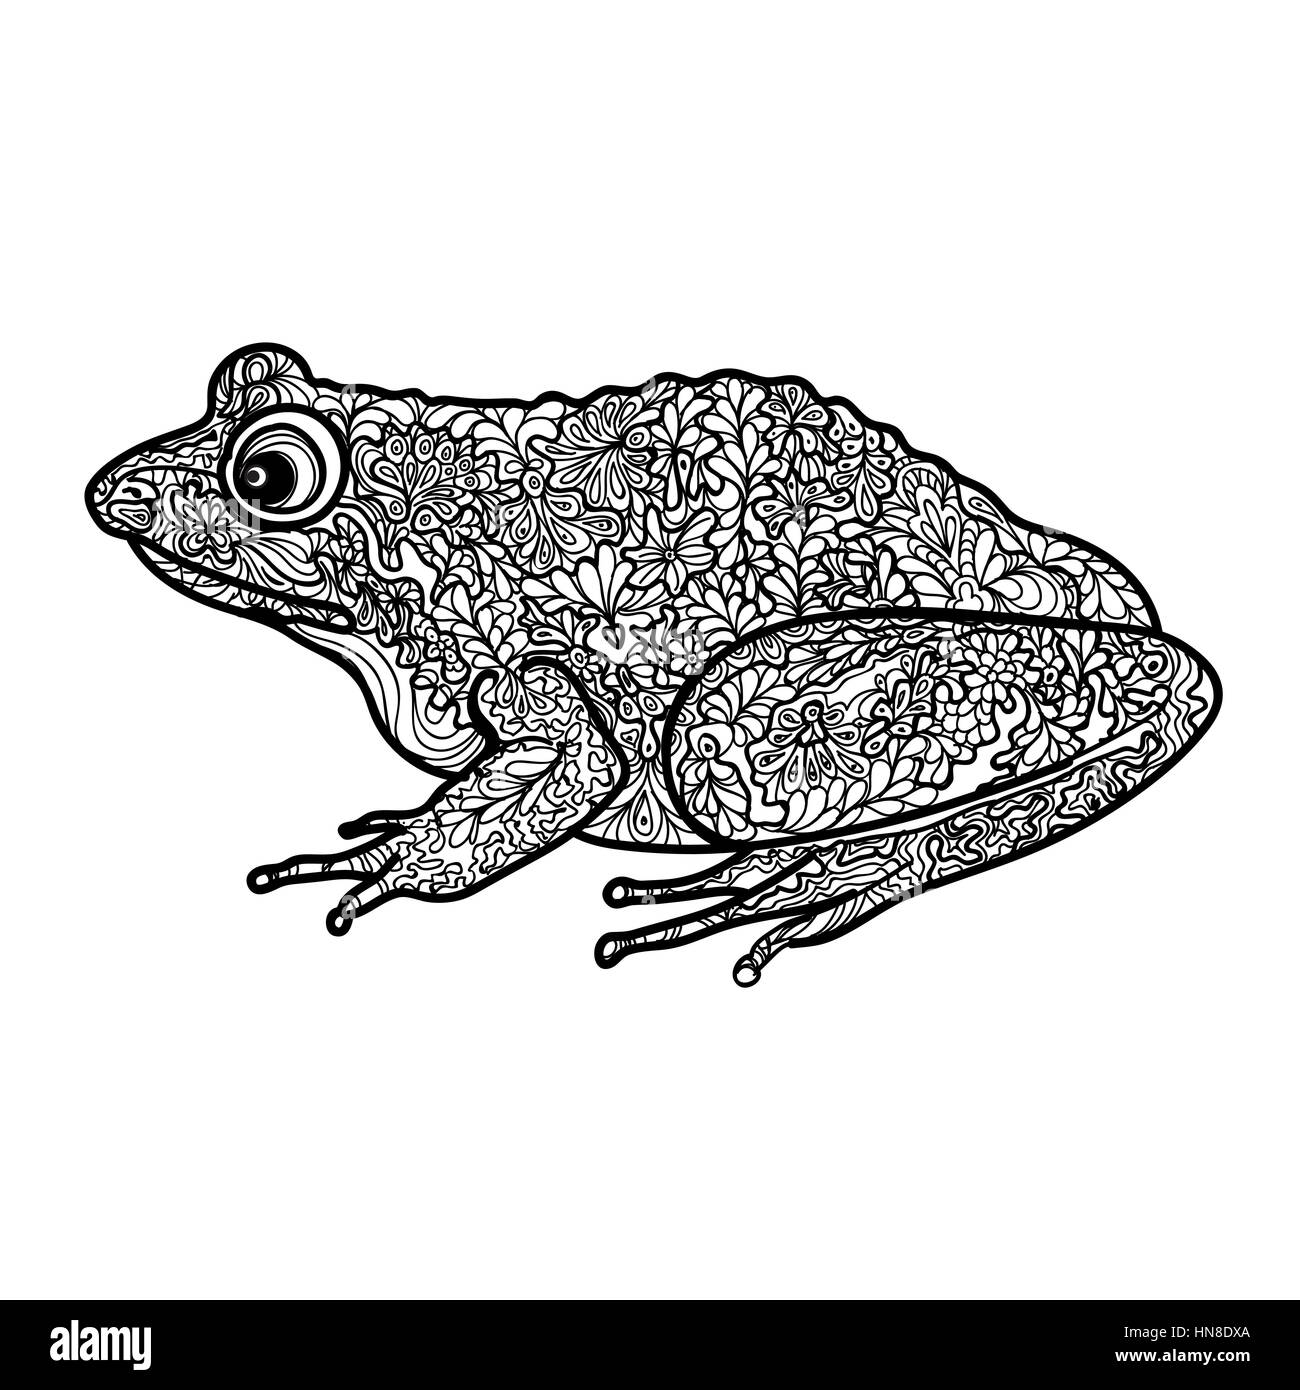 Frog isolated. Black and white ornamental doodle frog illustration with zentangle decorative ornament Stock Vector